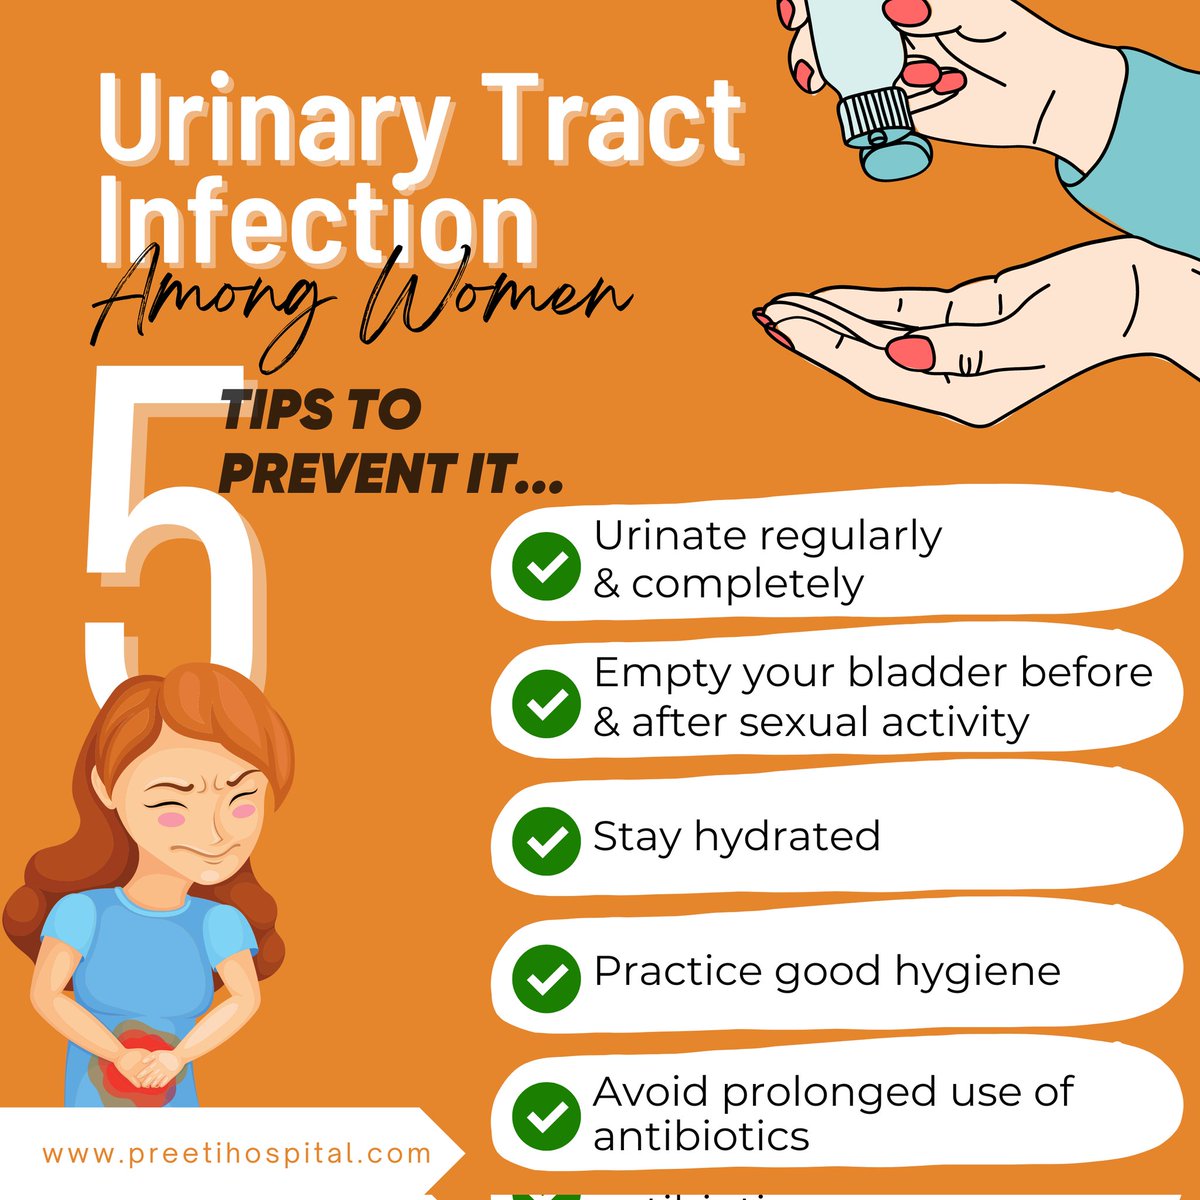 Urinary Track Infection is very common amongst women now a days. Here are few tips to keep you safe.
#preetikidneyhospitals #drvchandramohan #urology #urologist #urinarytractinfection #woman #women #womensissues  #urinaryproblem #tip #tips